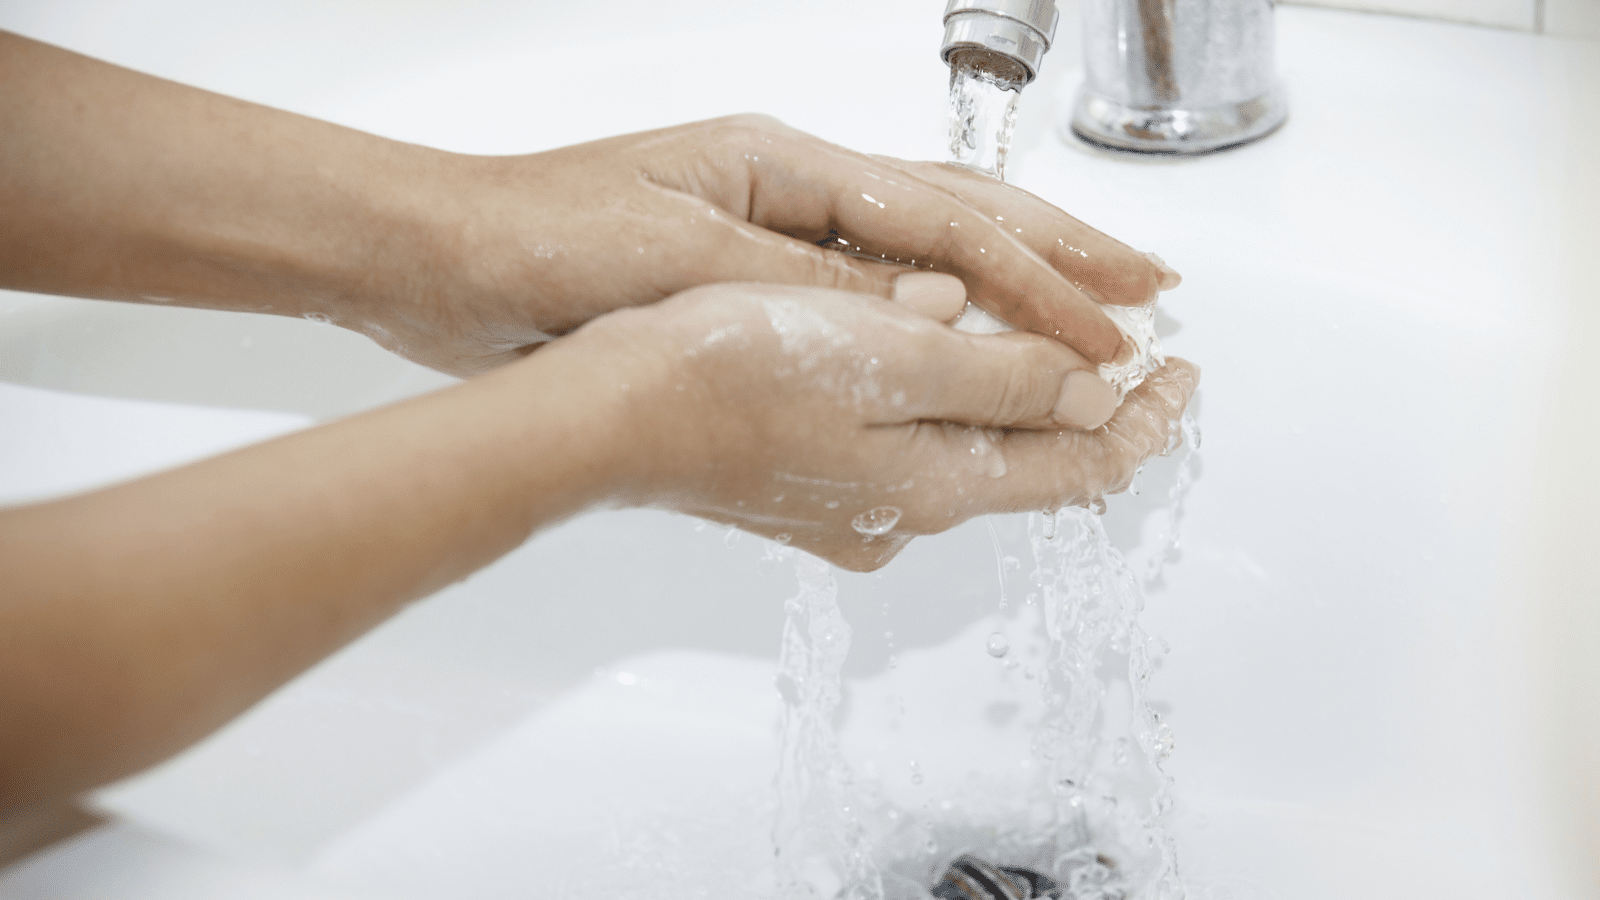 Two hands being washed in a white sink